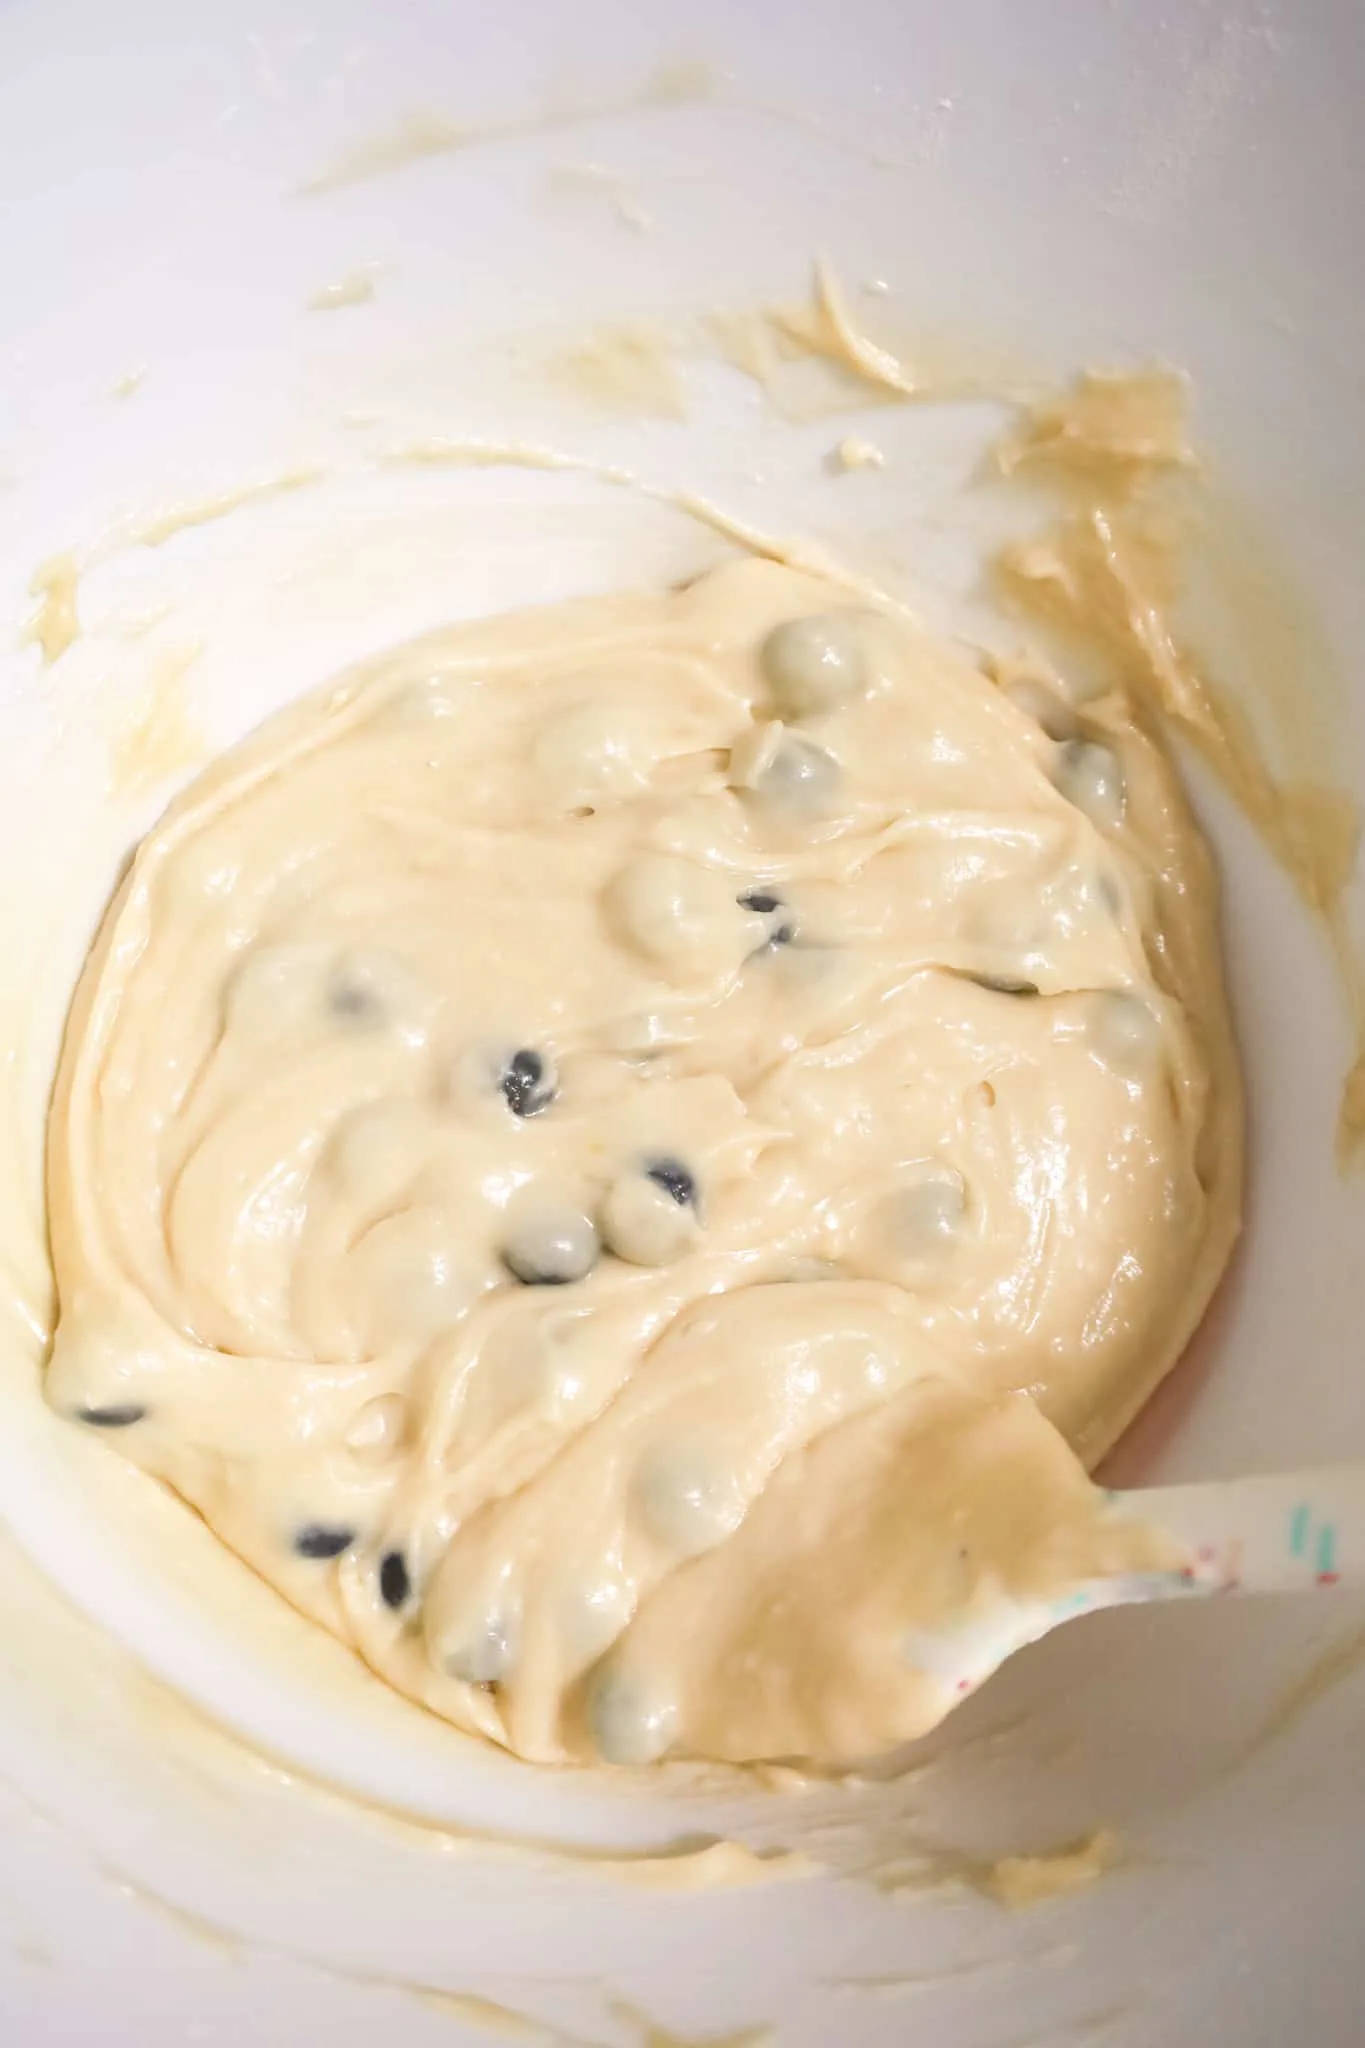 blueberries stirred into muffin batter